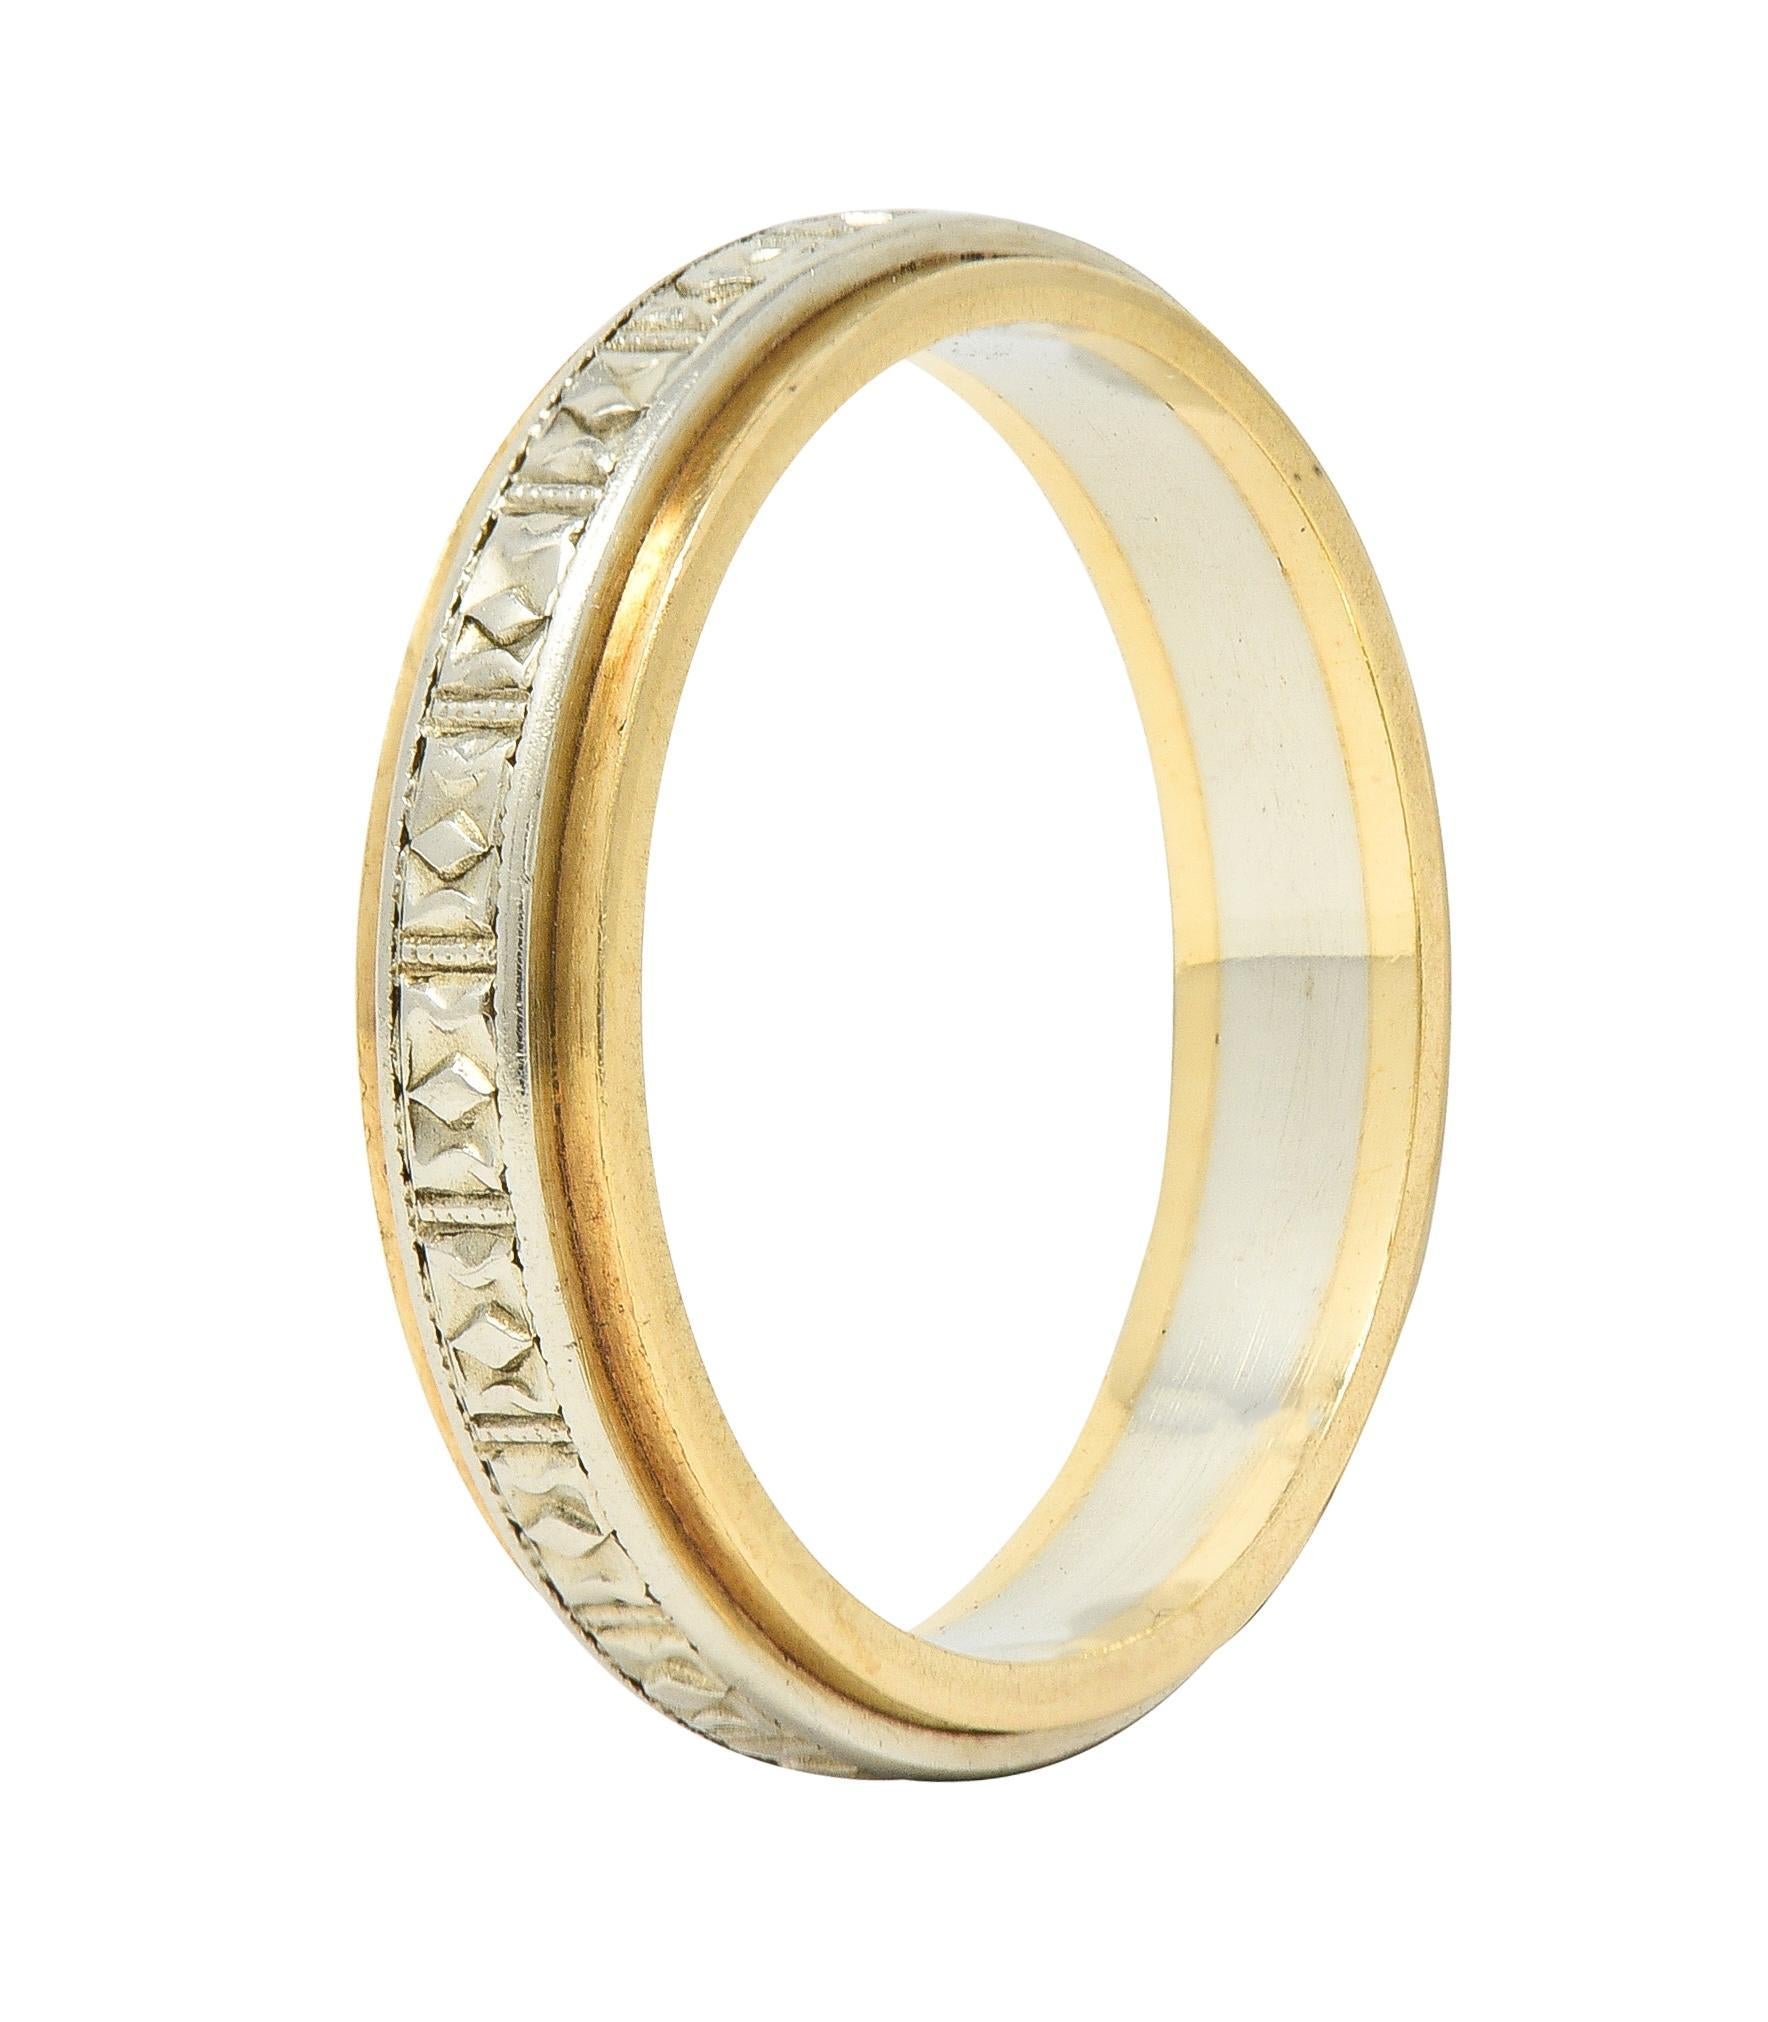 Designed ad a yellow gold band centeirng a raised white gold band
With engraved geometric diamond pattern fully around
Tested as 14 karat gold 
Circa: 1930s
Ring size: 6 and not sizable
Measures north to south 4.0 mm and sits 1.5 mm high
Total